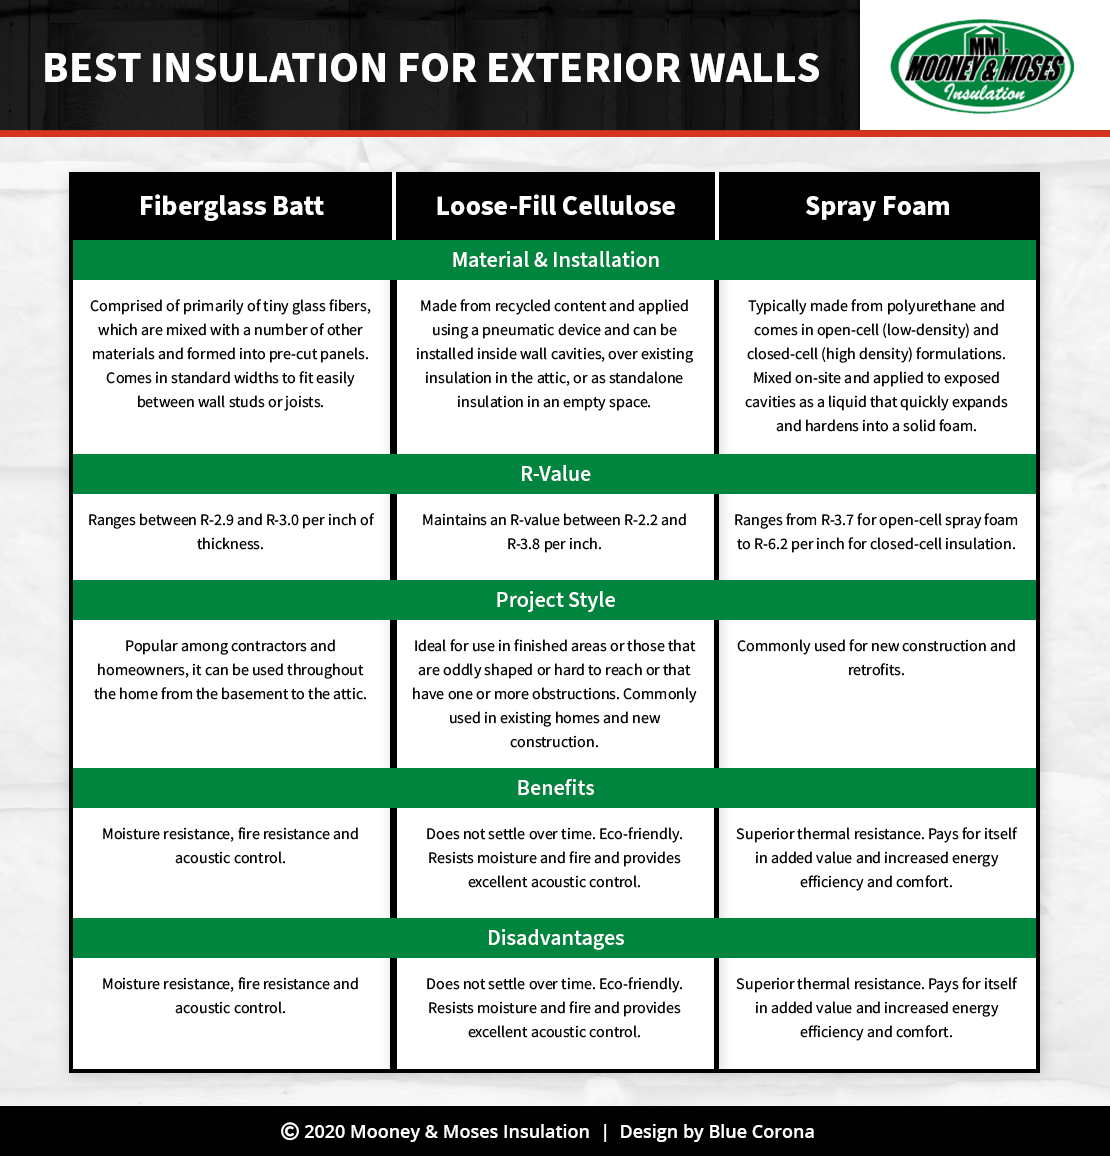 Infographic explaining best insulation for exterior walls.